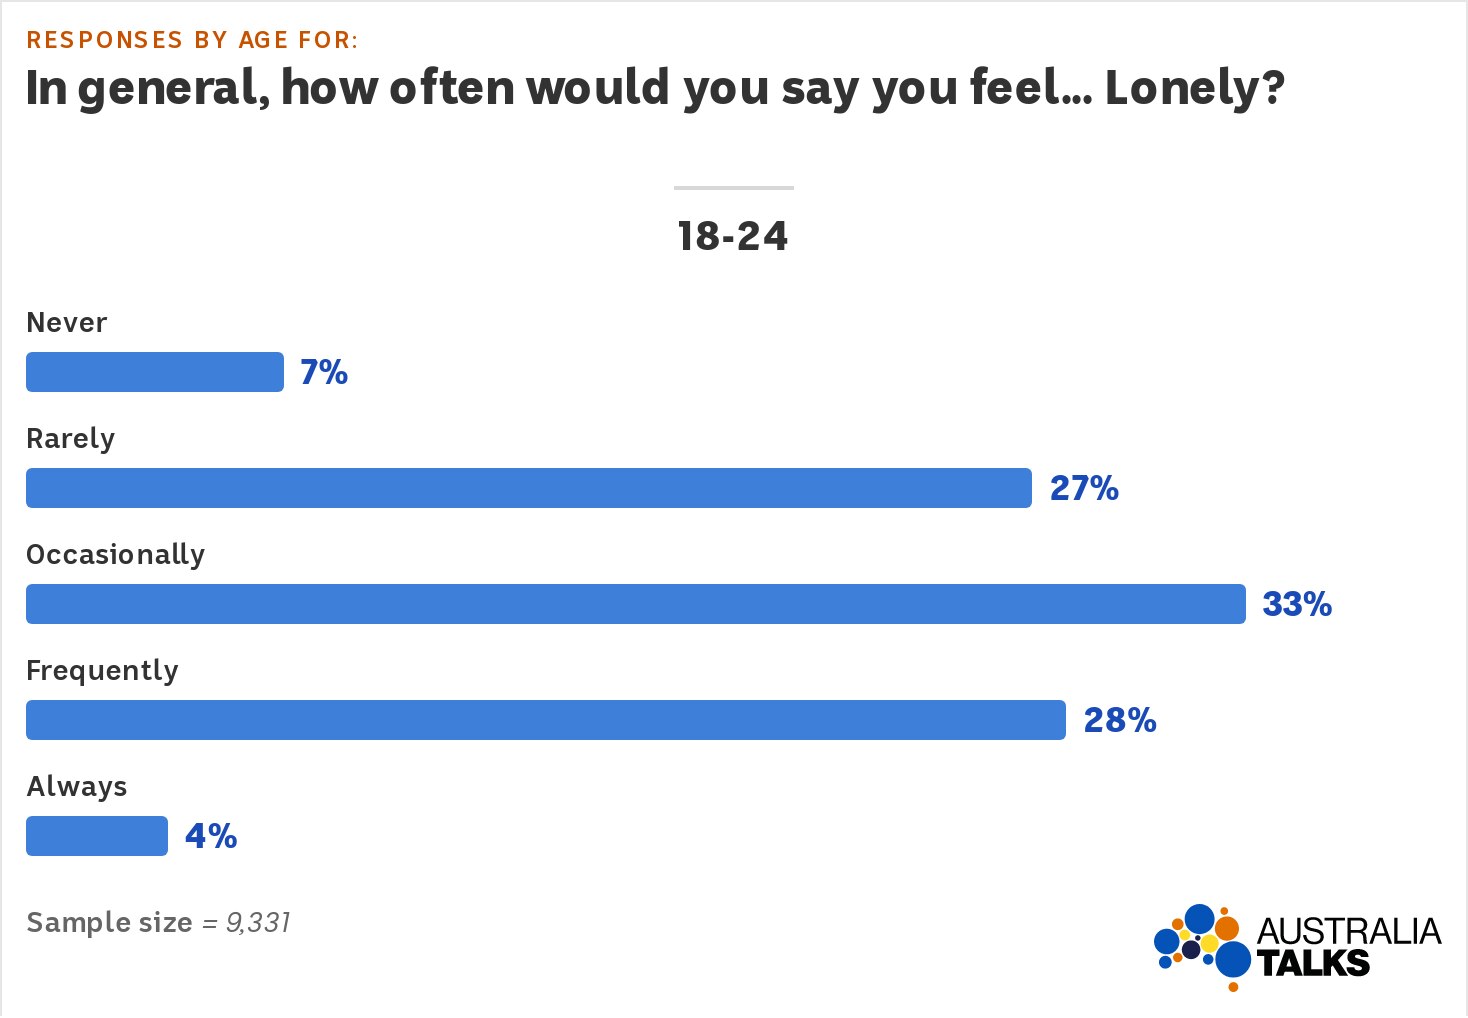 A stacked bar graph shows 7% of 18-24s feel lonely never, 27% rarely, 33% occasionally, 28% frequently, 4% always